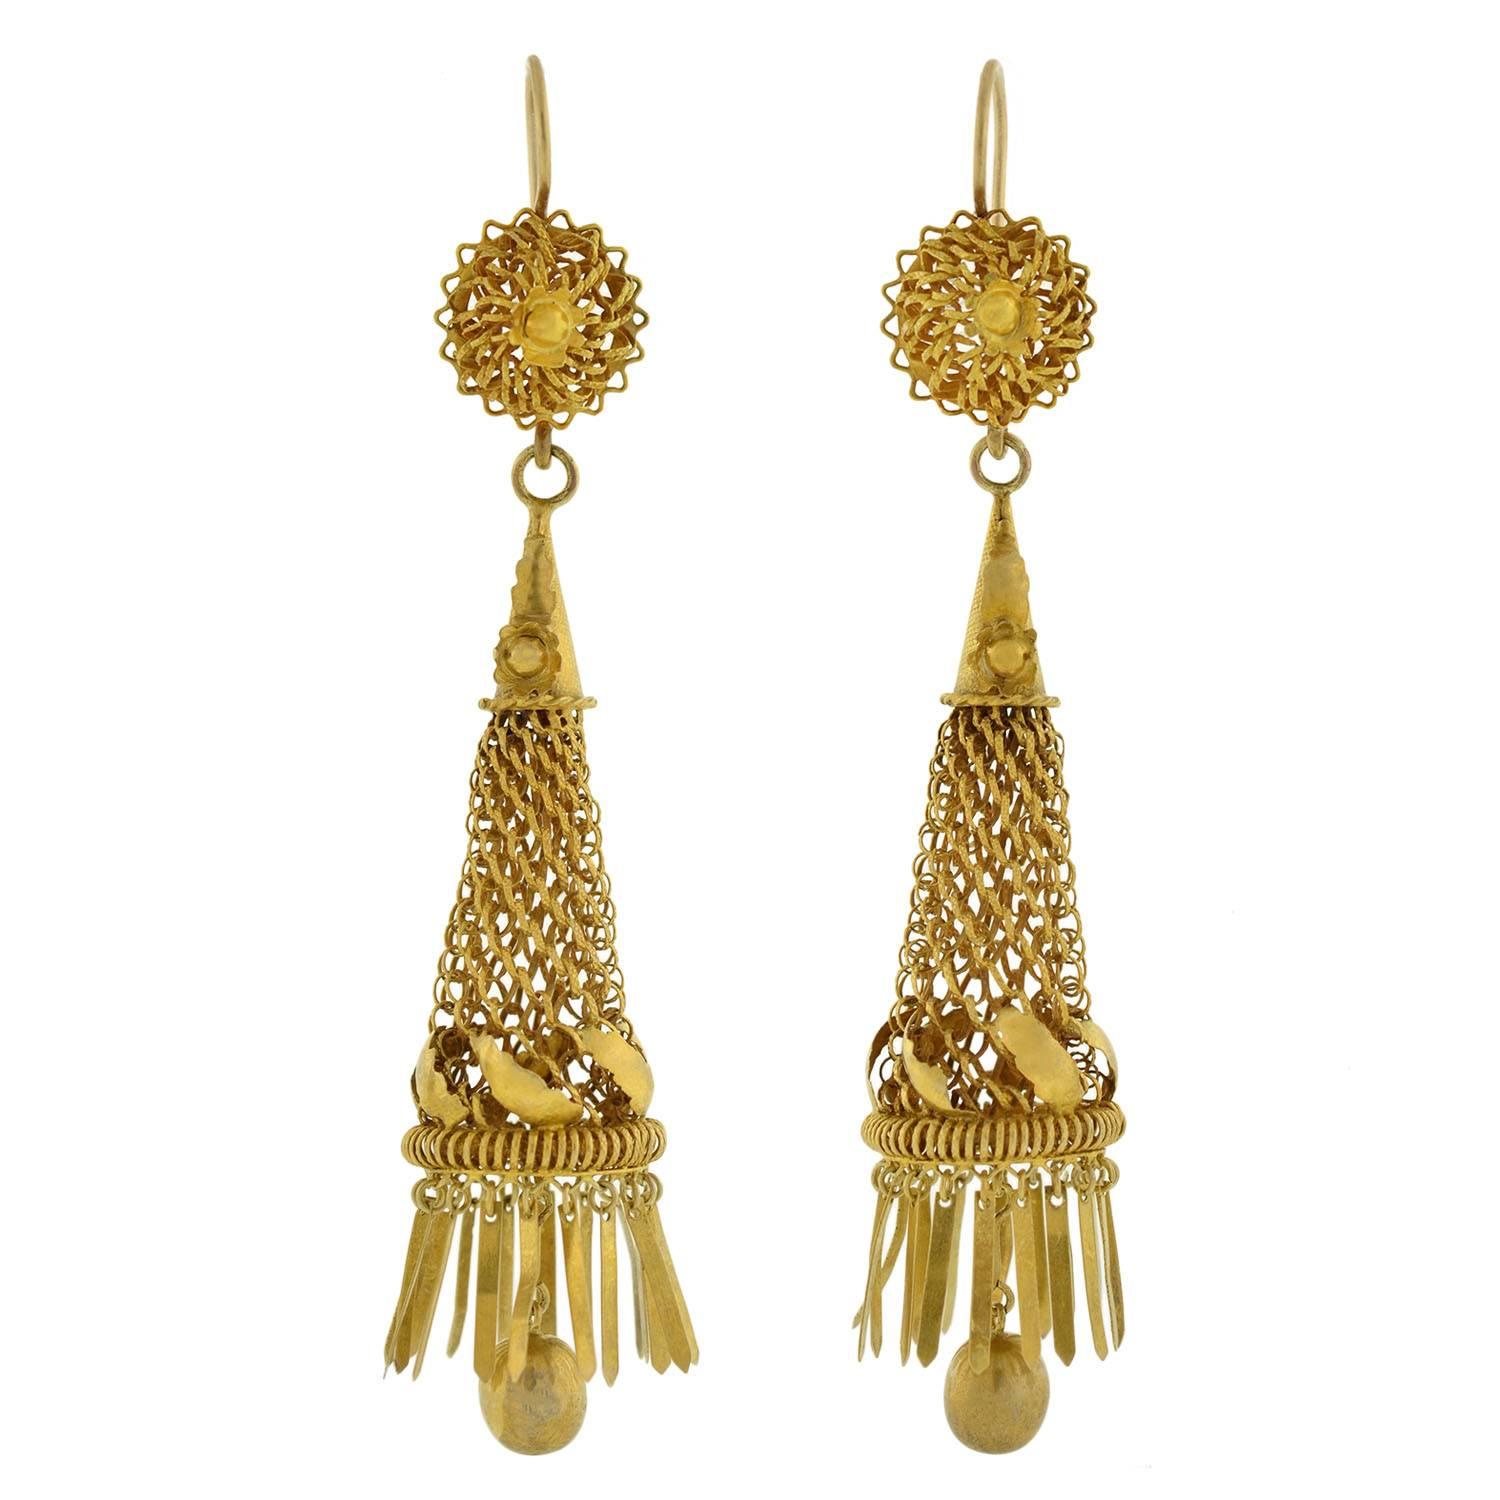 Victorian Dramatic Handmade Gold Caged Fringe Earrings